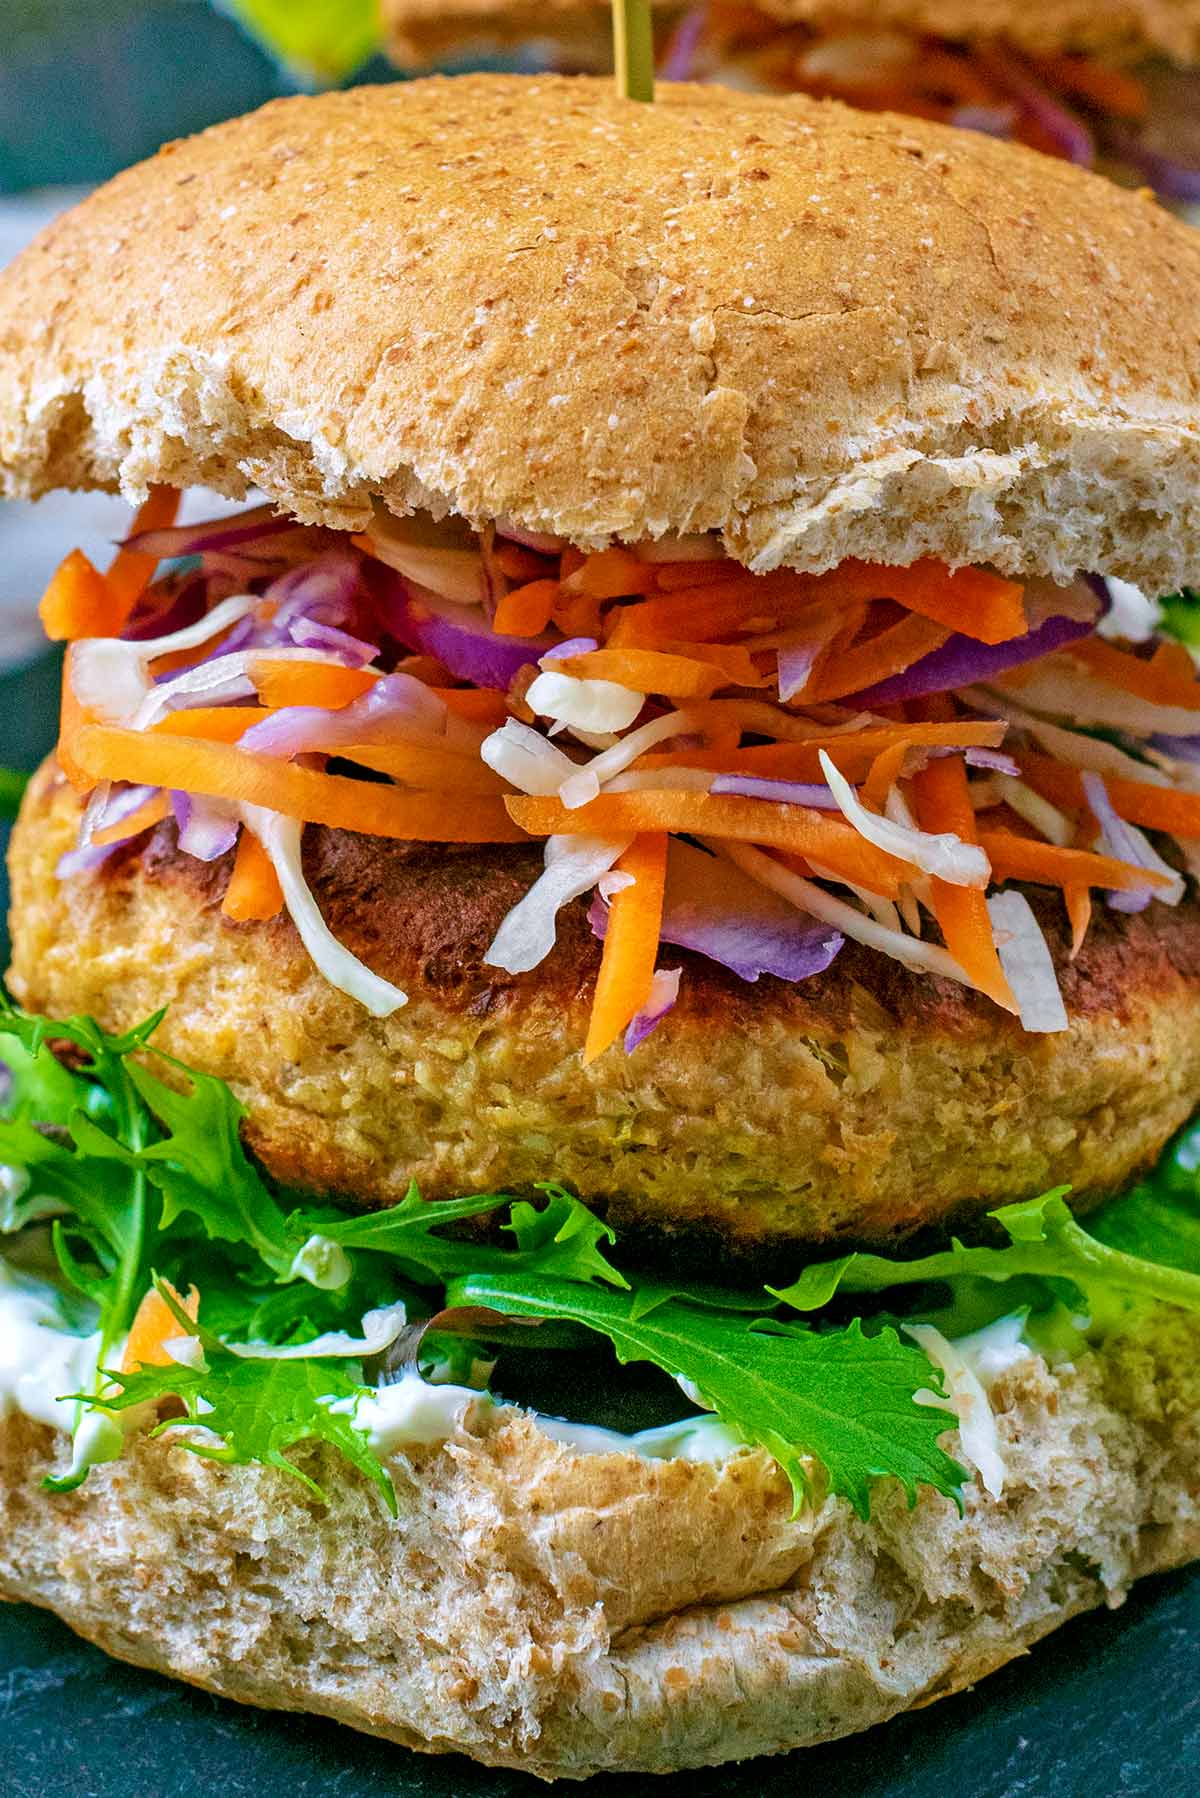 A salmon burger in a bun with lettuce and slaw.